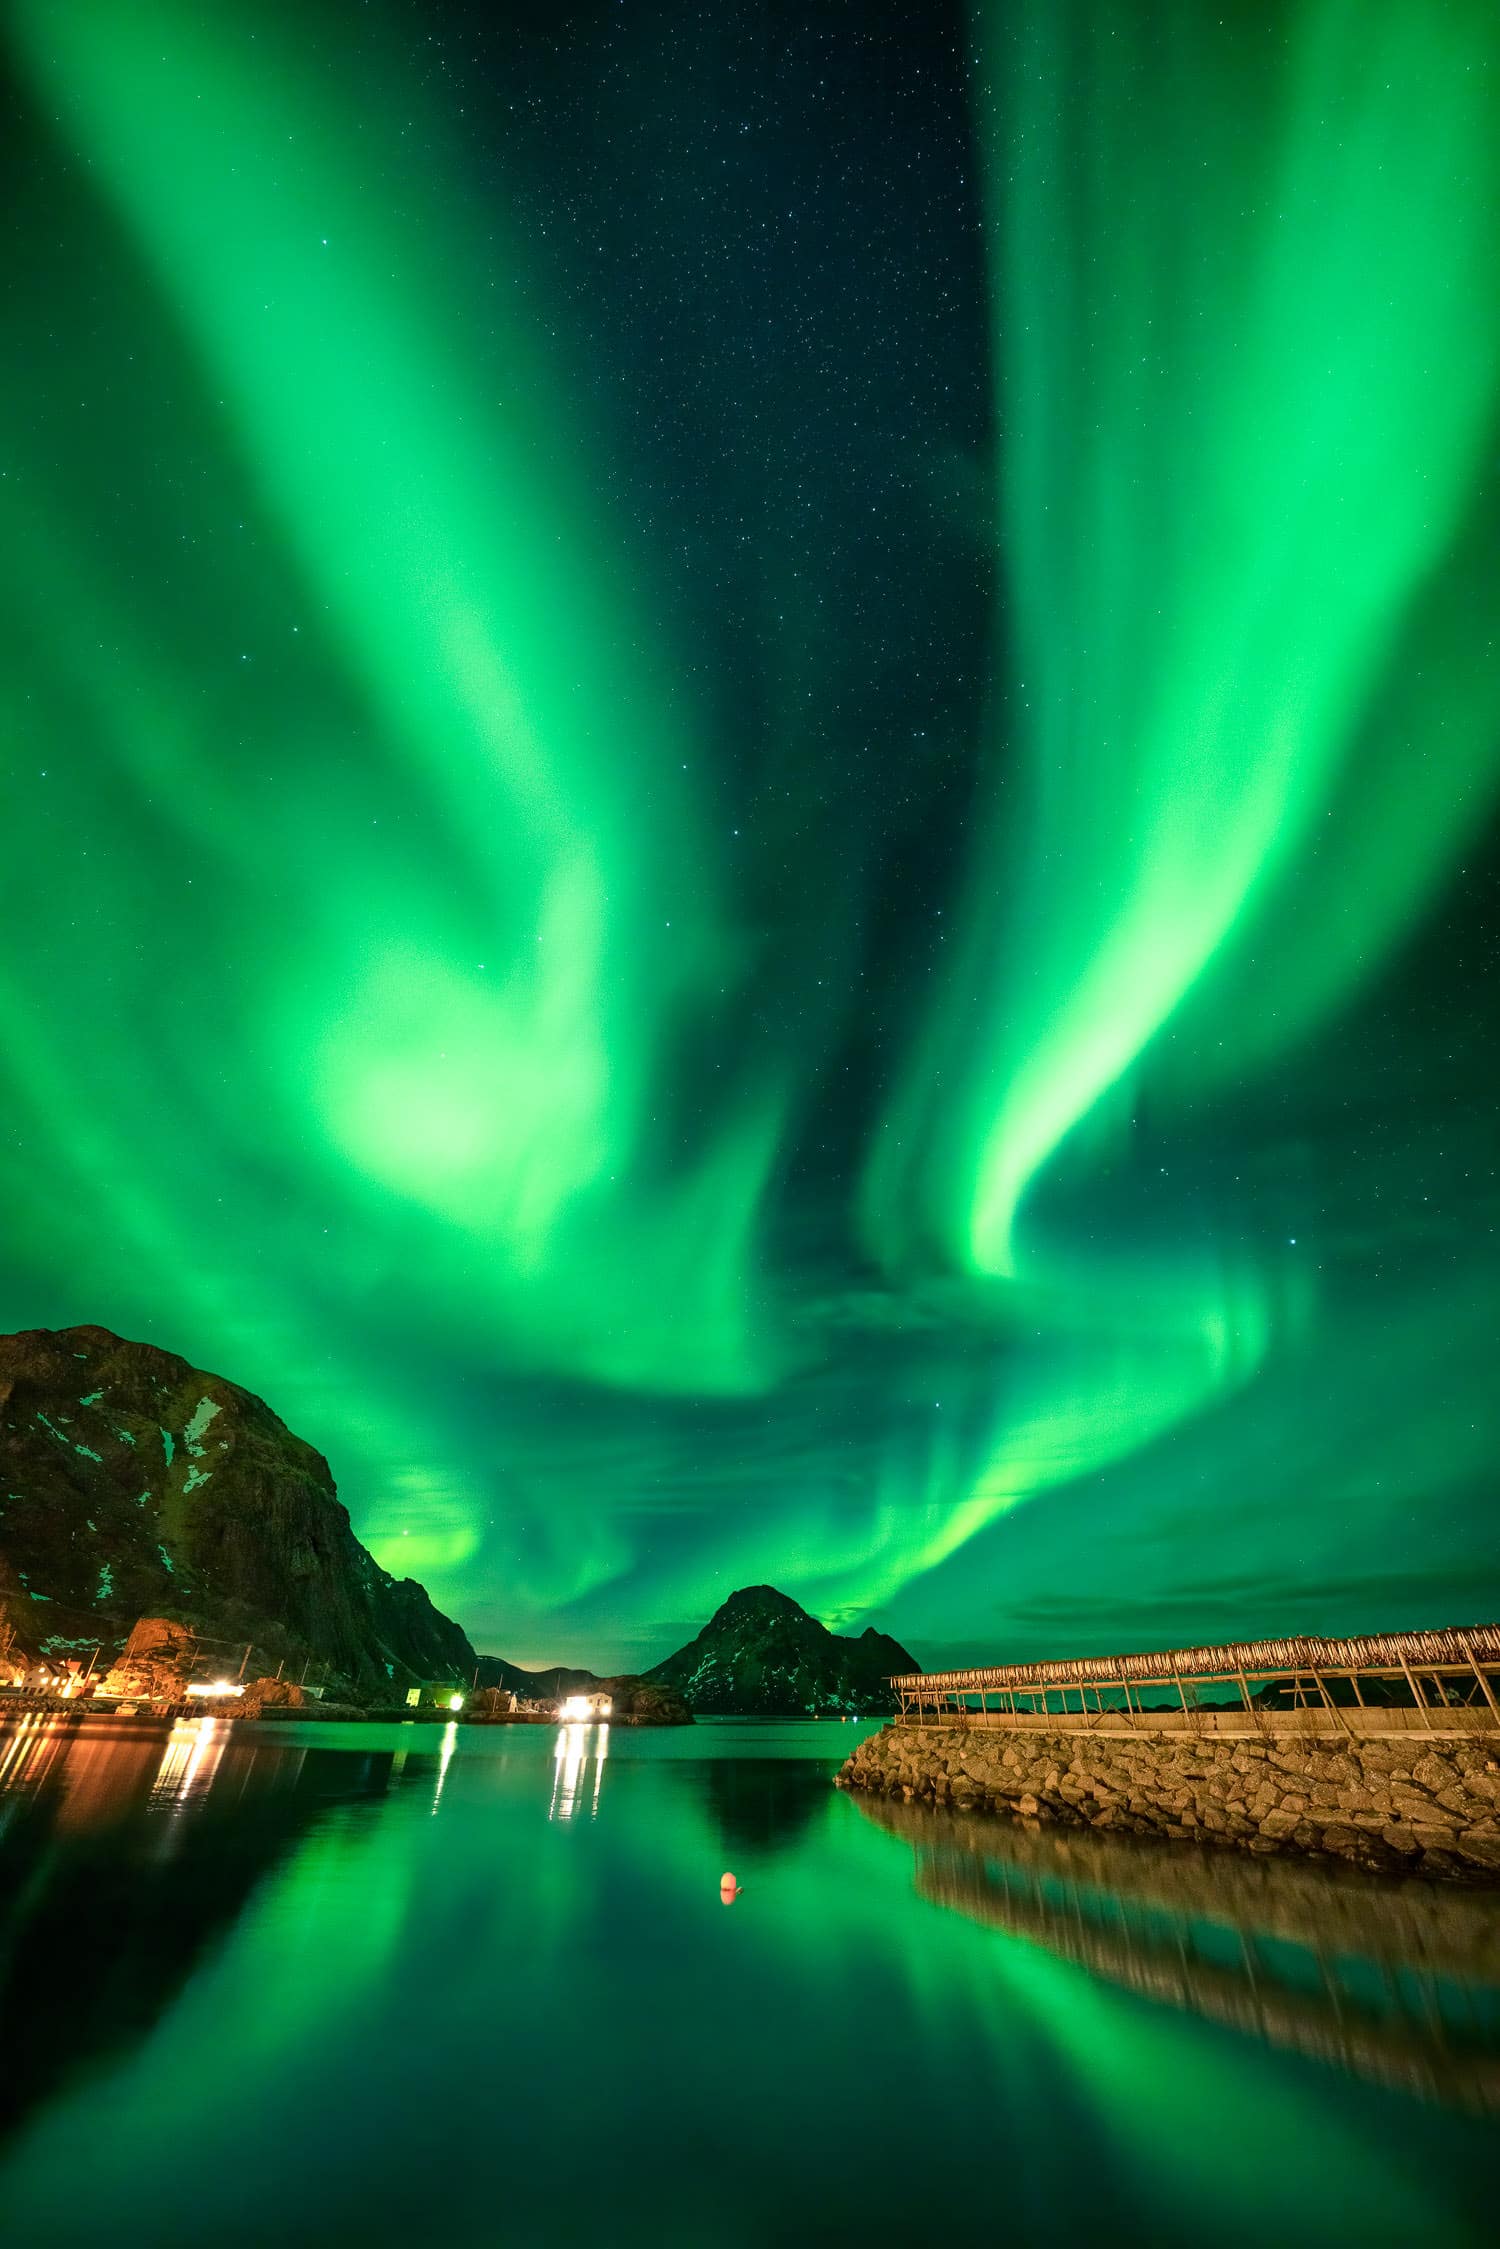 Northern Lights Photo Workshop in Norway Lofoten Islands with Colby Brown Photography